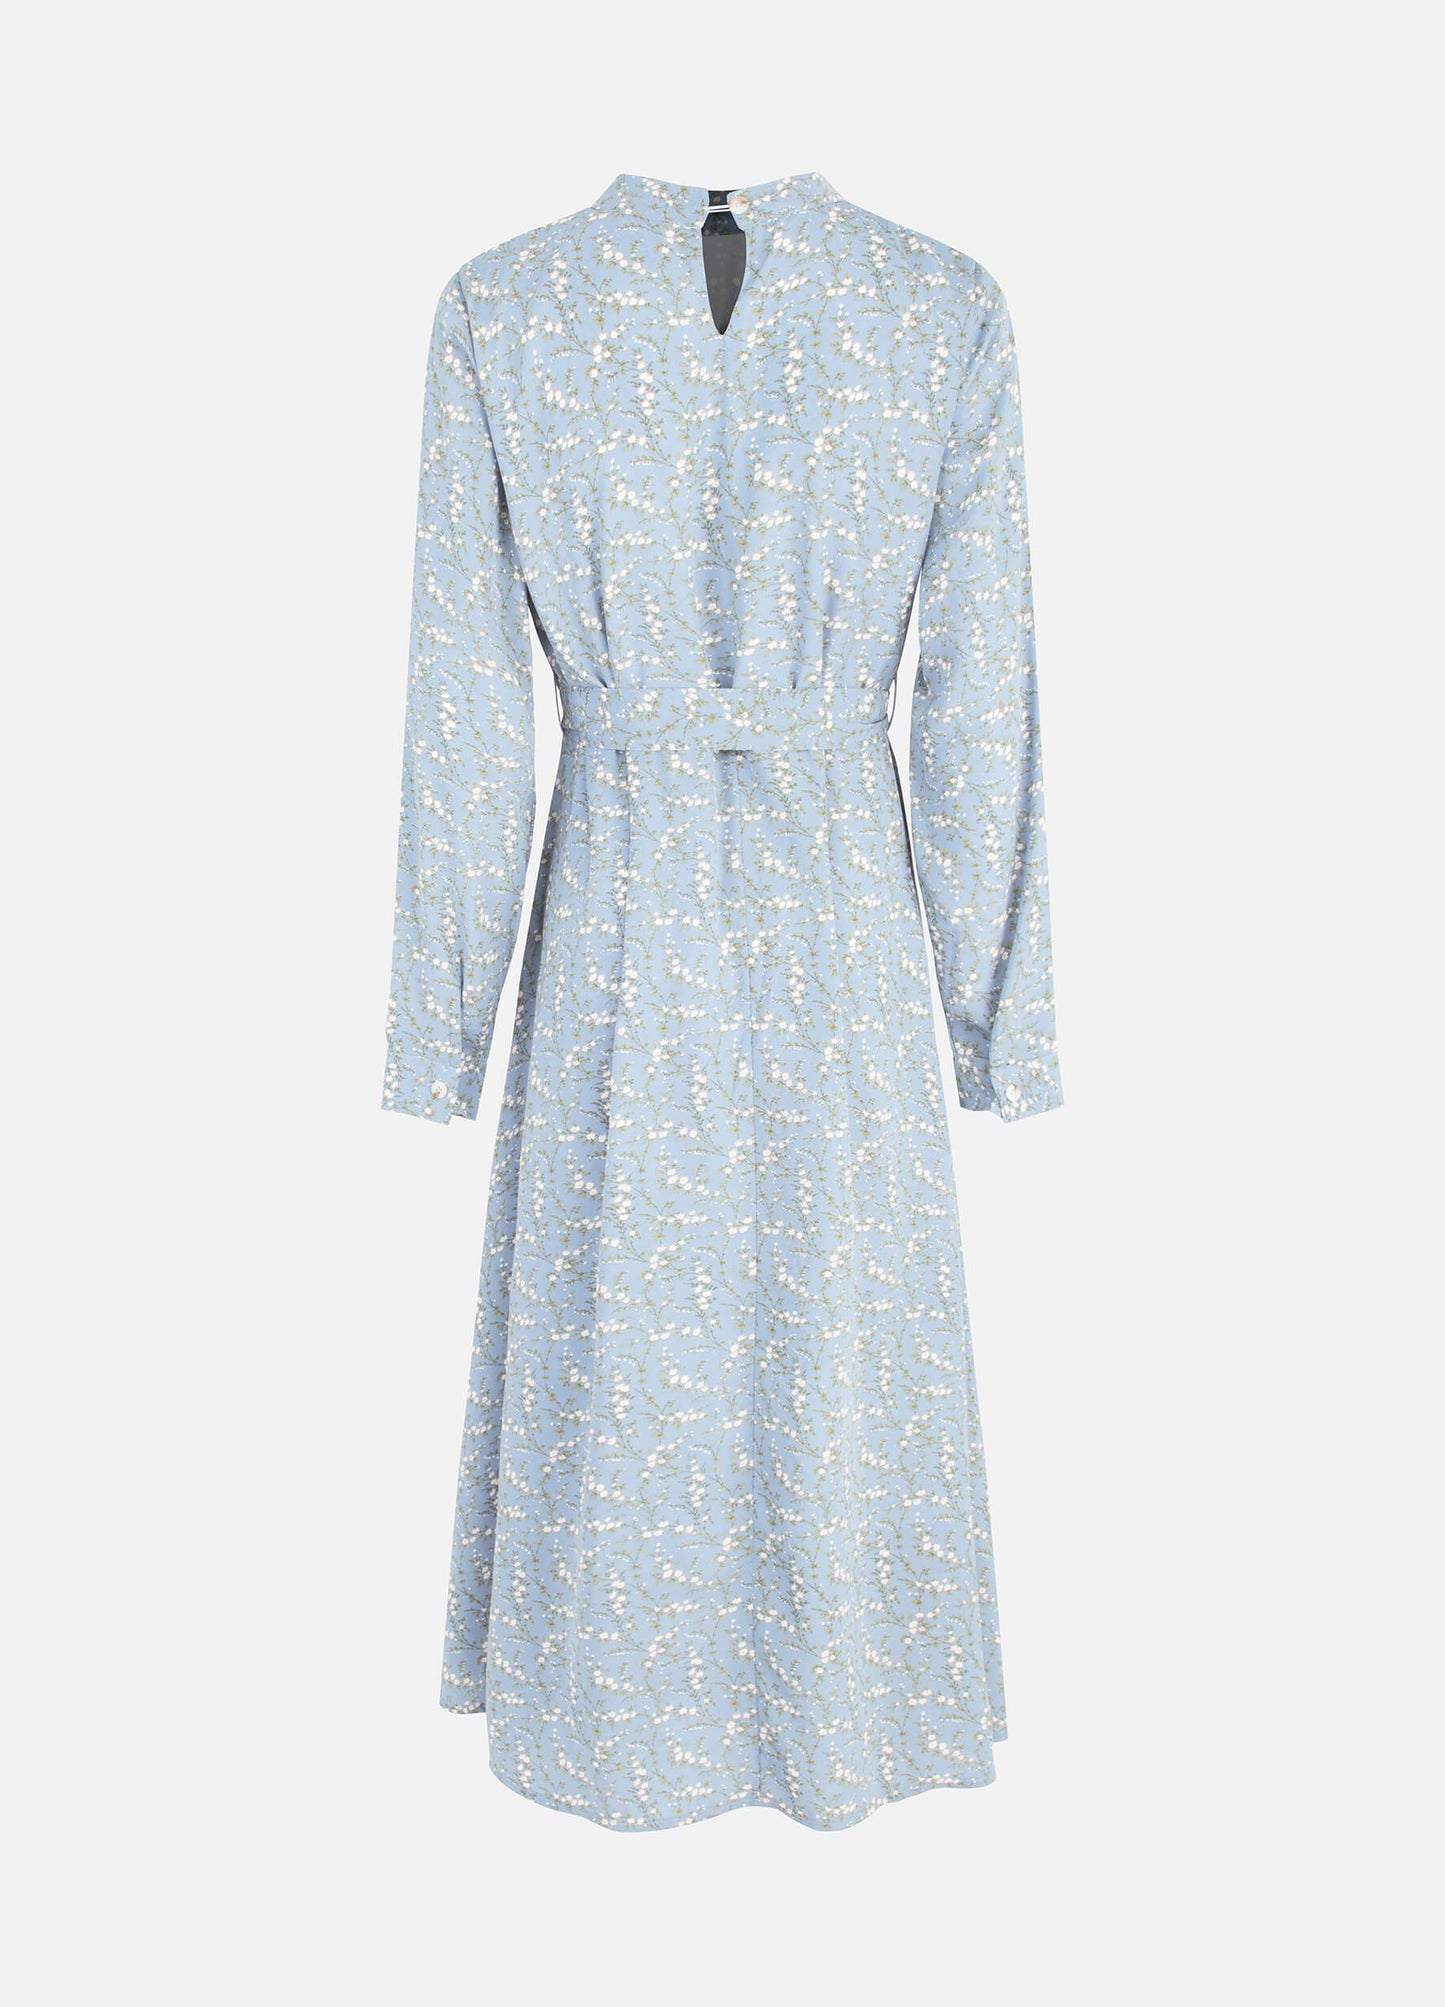 Women's Fall Floral Print Long Sleeve Belted Midi Dress-Blue back view